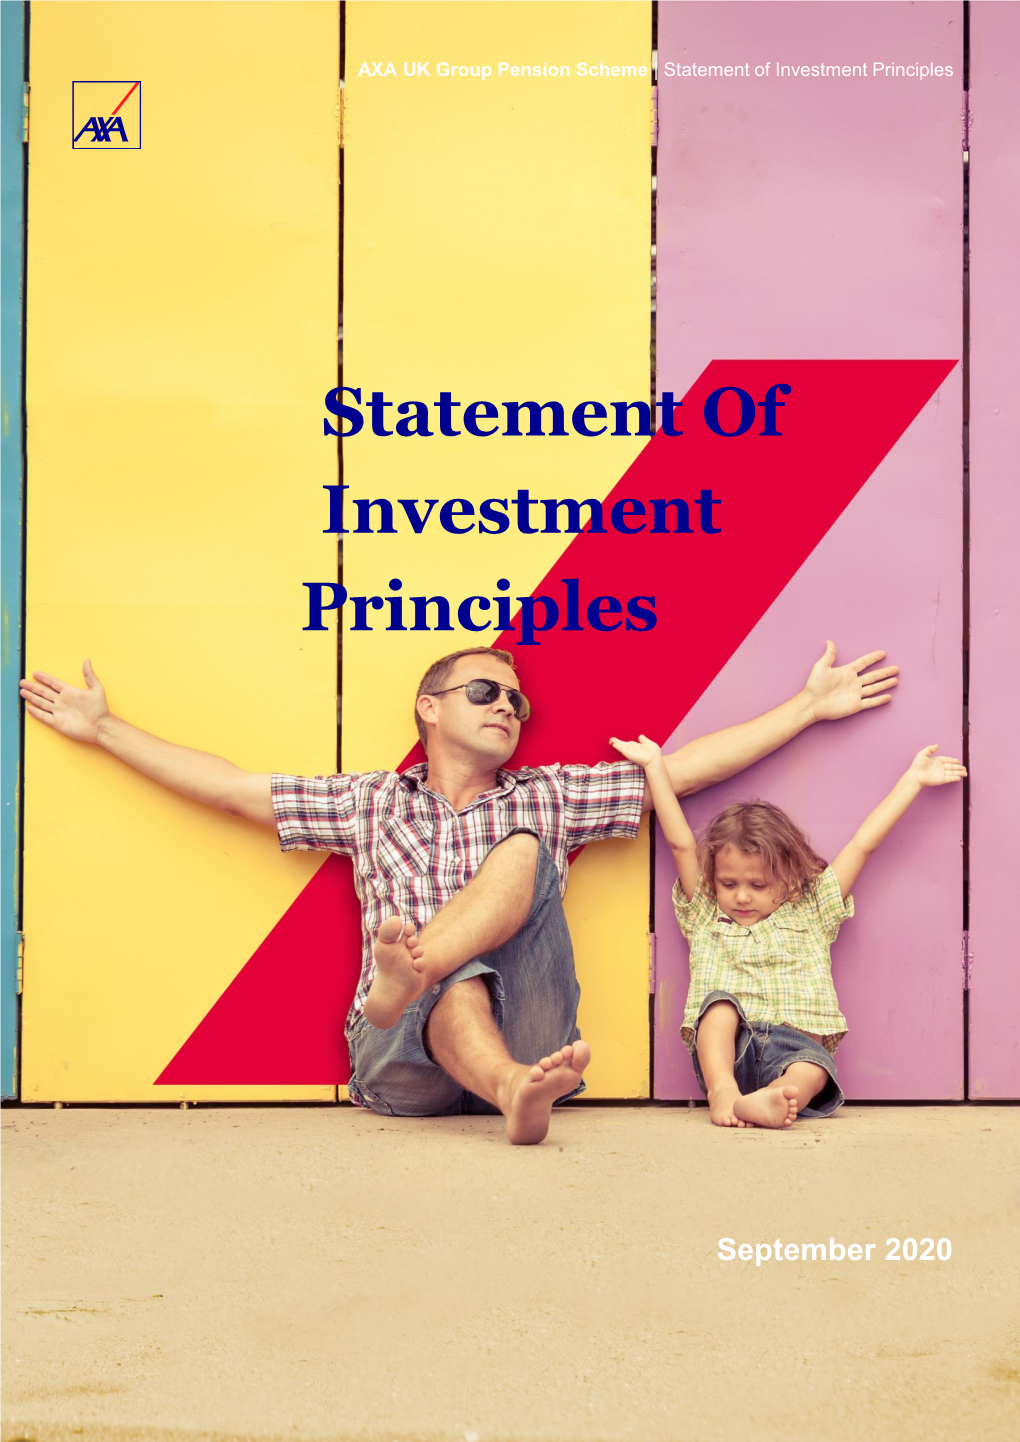 Statement of Investment Principles